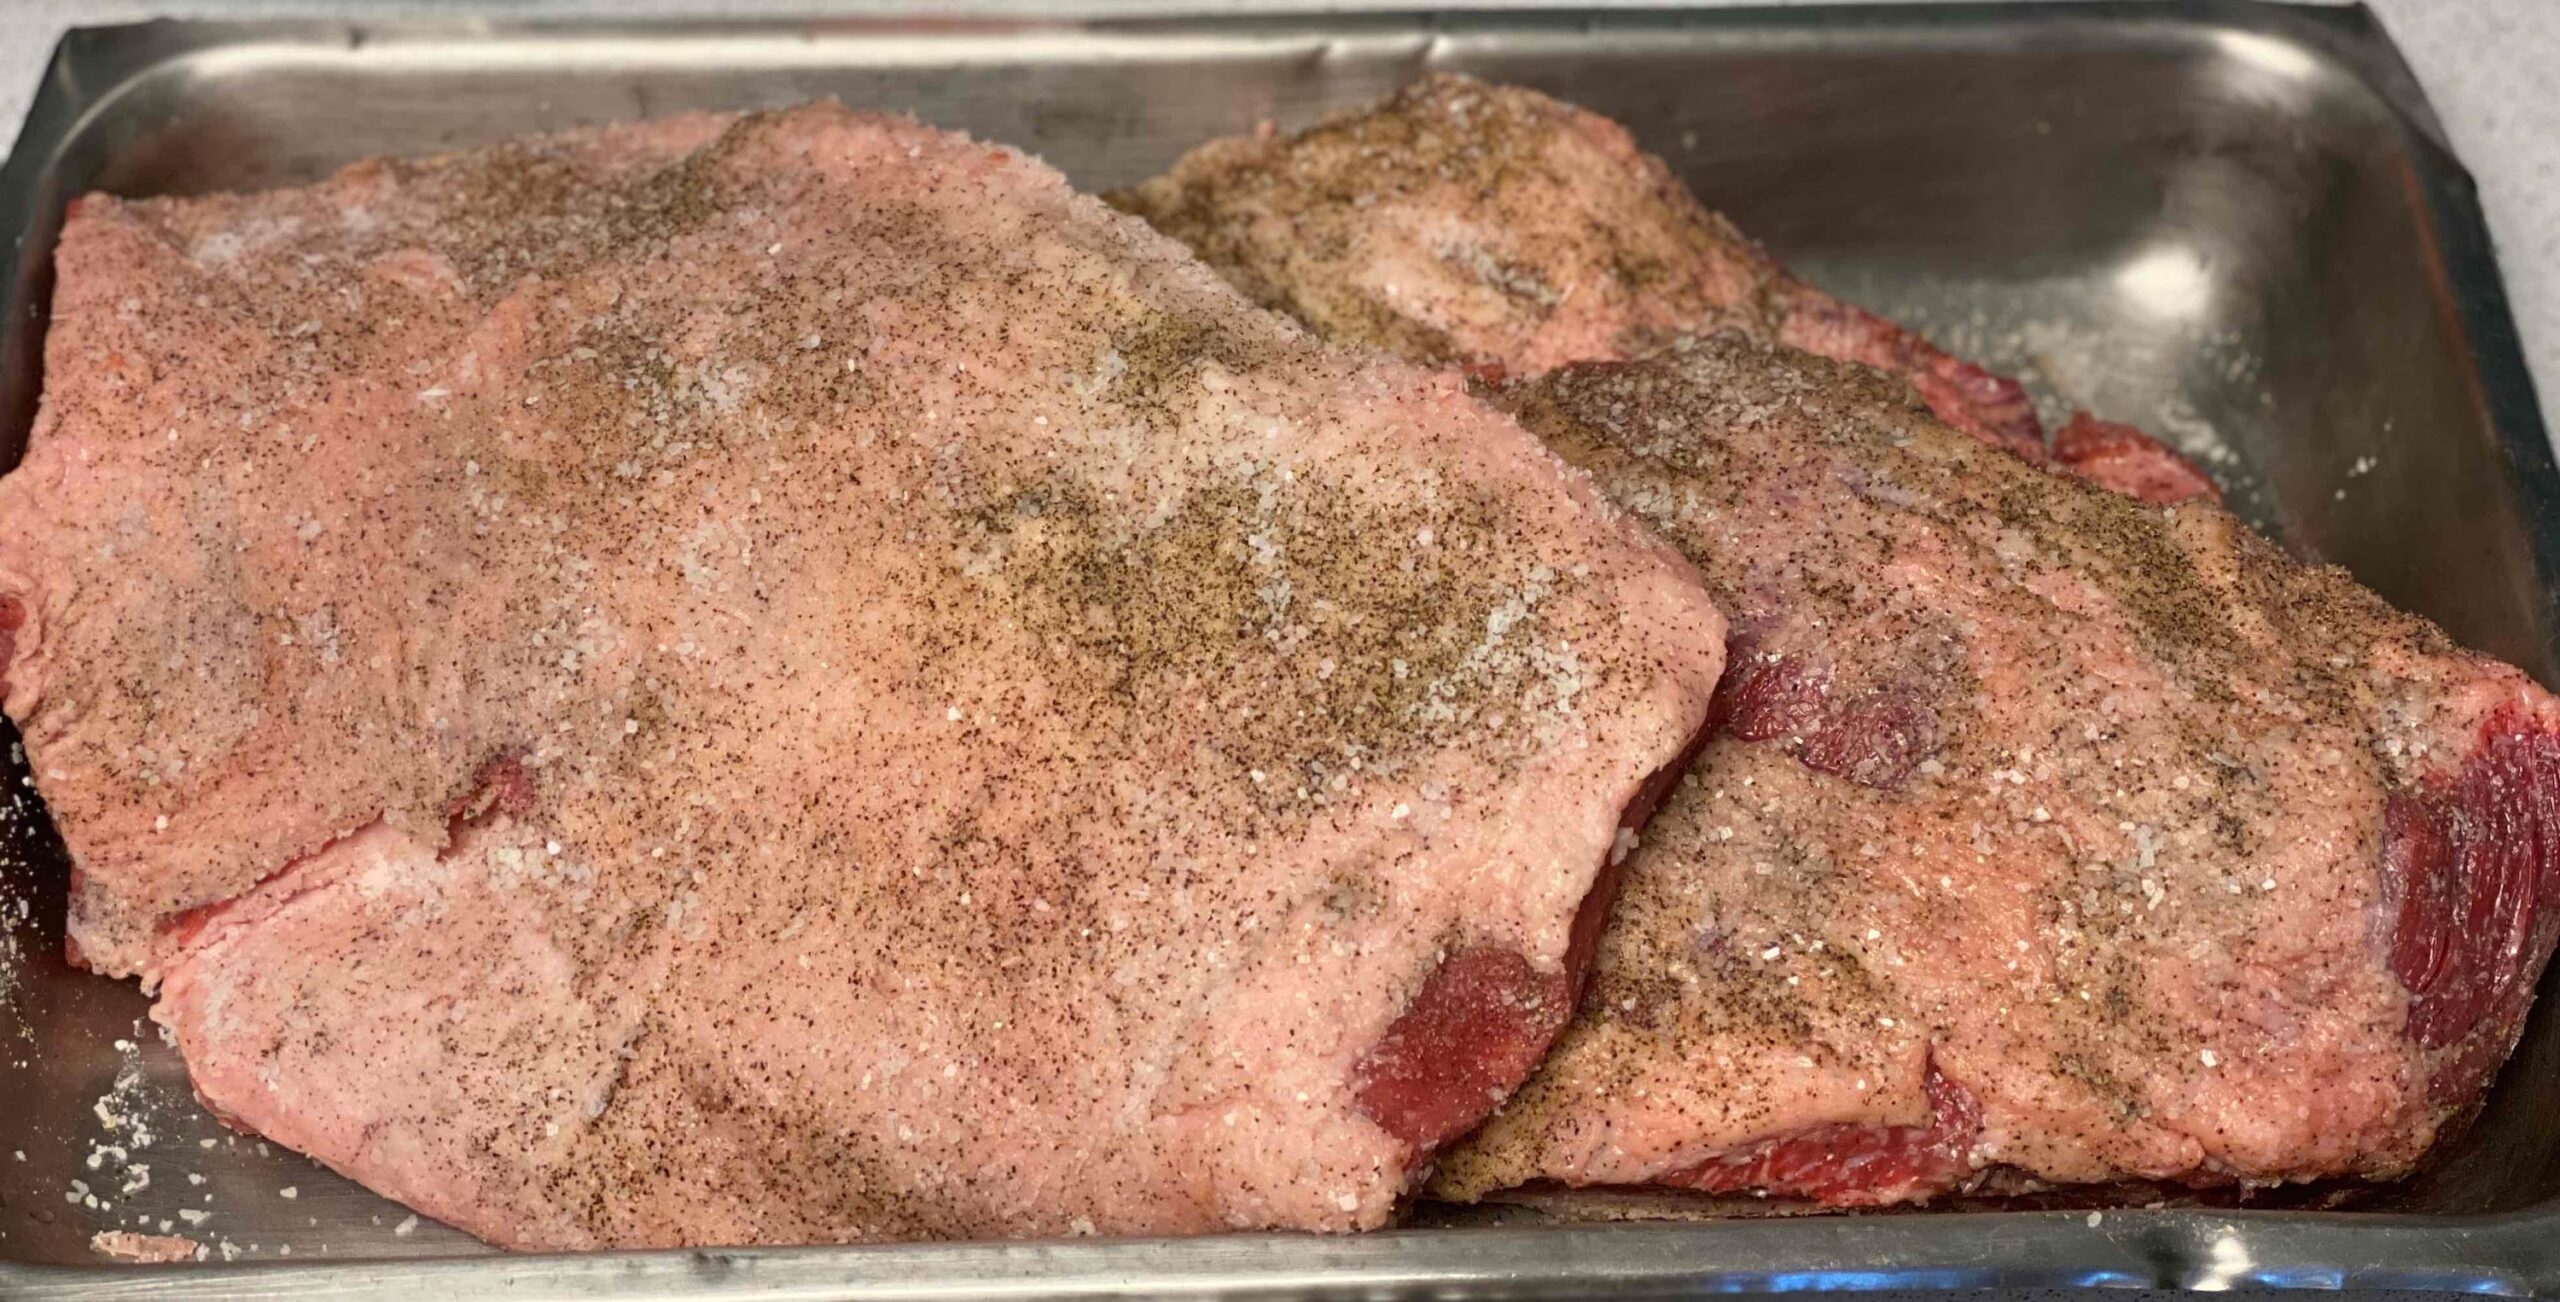 brisket seasoned and ready for the smoker